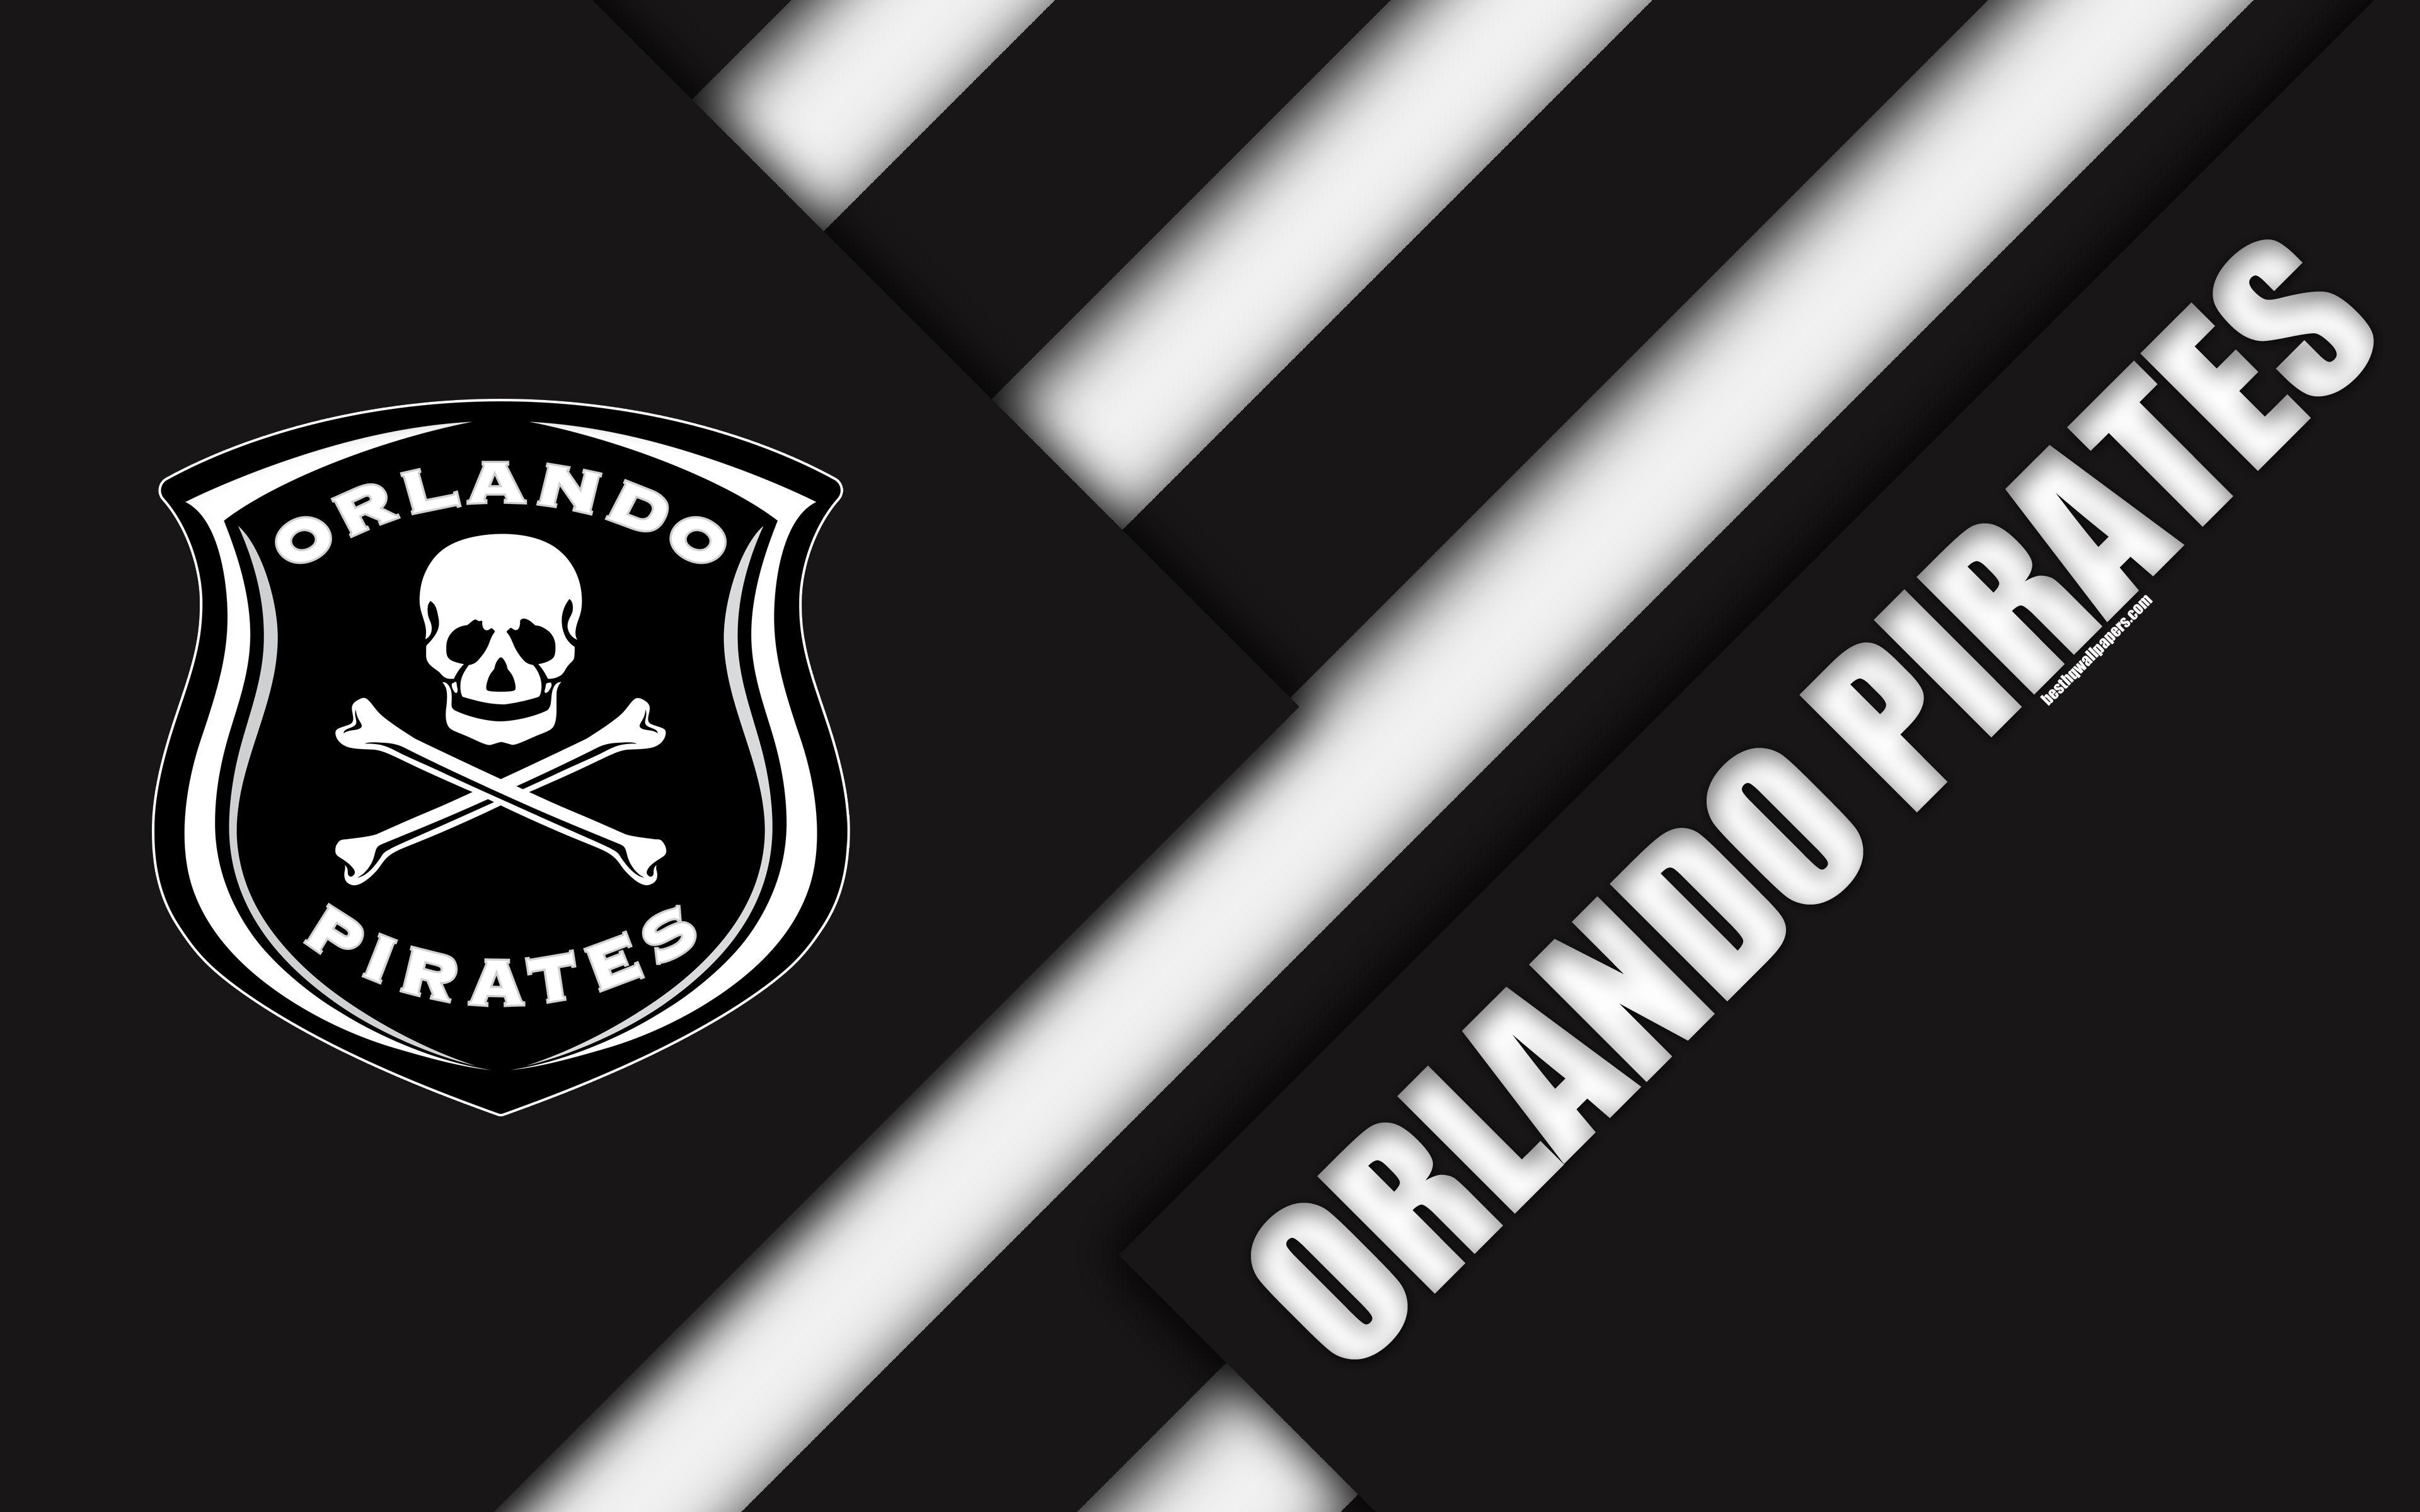 Download wallpaper Orlando Pirates FC, 4k, South African Football